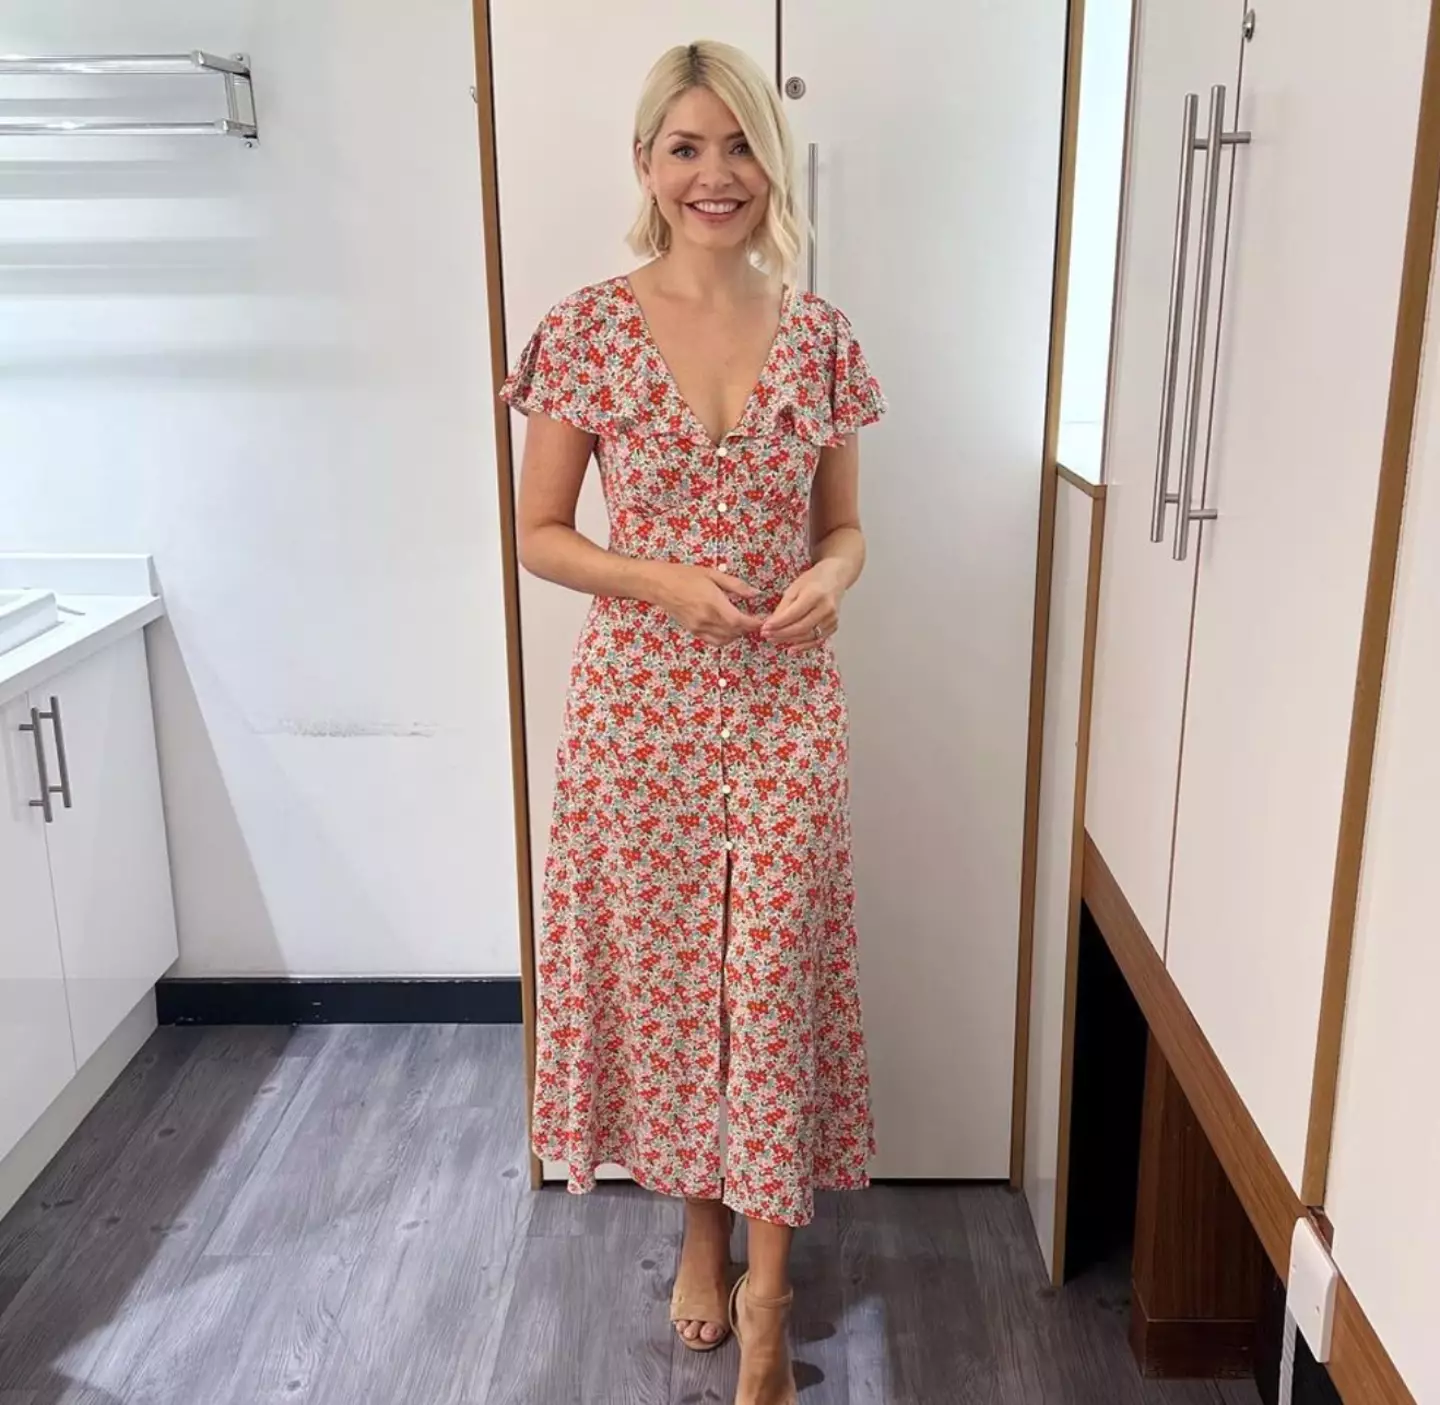 Holly Willoughby stepped down from This Morning in October last year. Instagram/@hollywilloughby